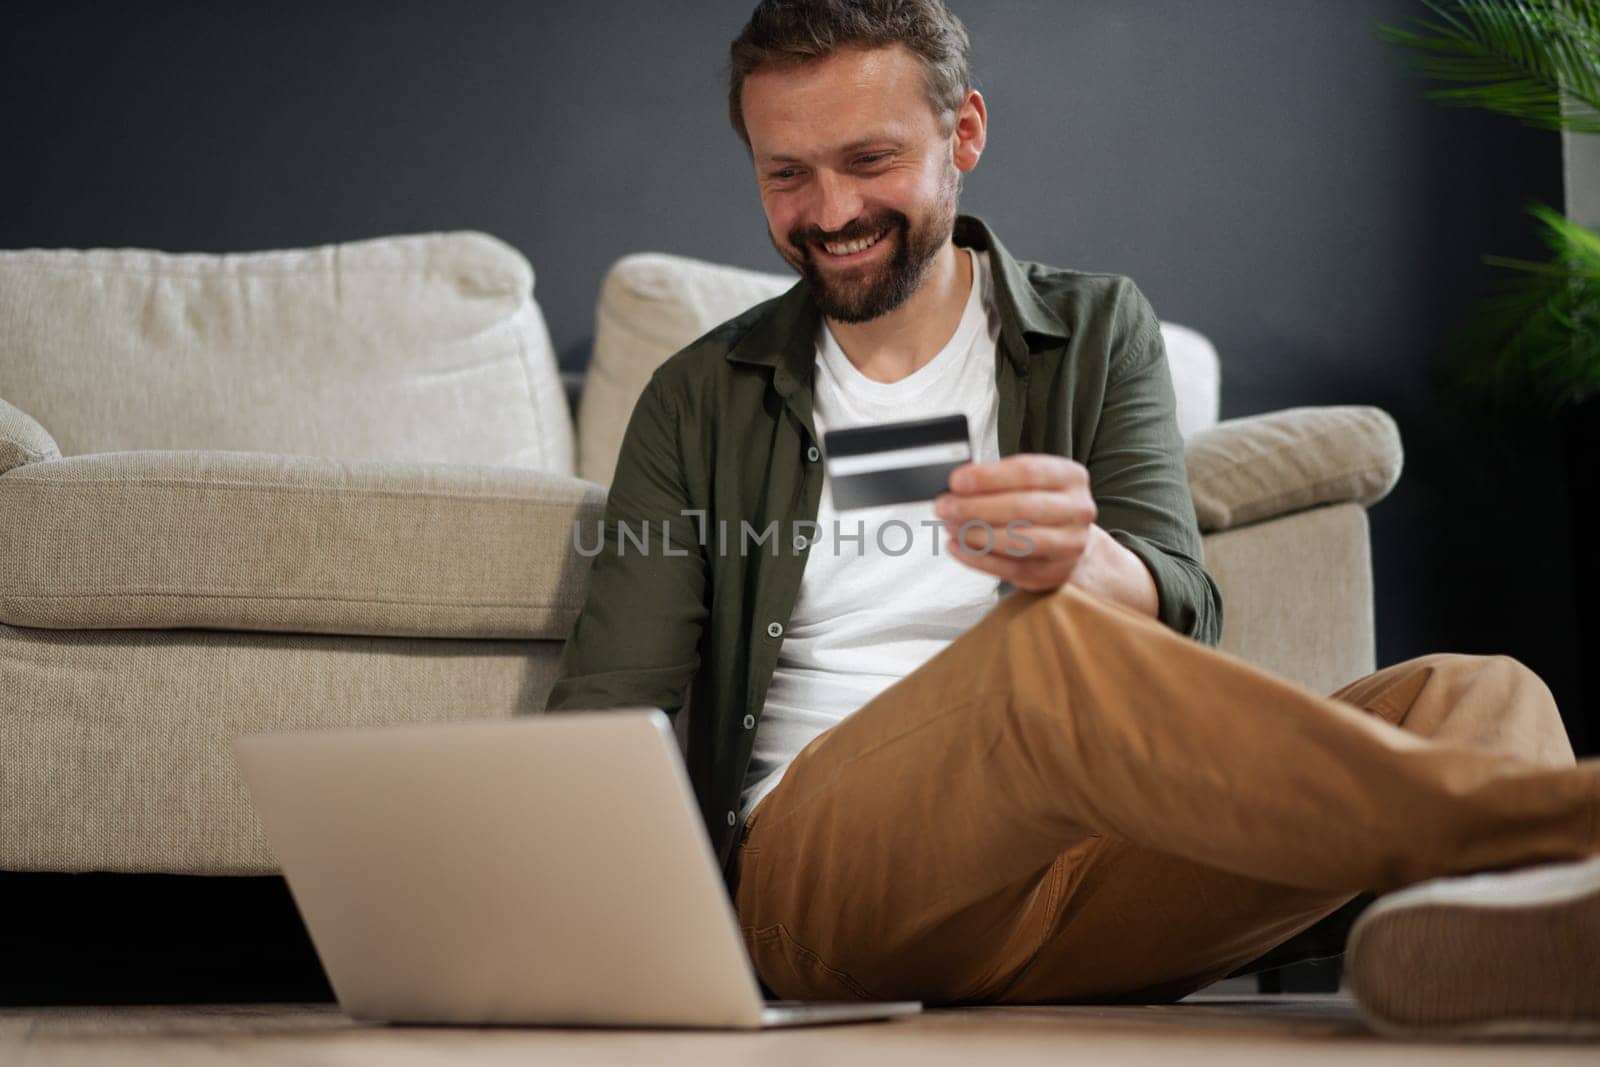 Happy, smiling customer sitting on floor next to sofa while shopping online using credit card for online auction. Concept of online payment systems, e-commerce, and online shopping in modern and technological setting. by LipikStockMedia